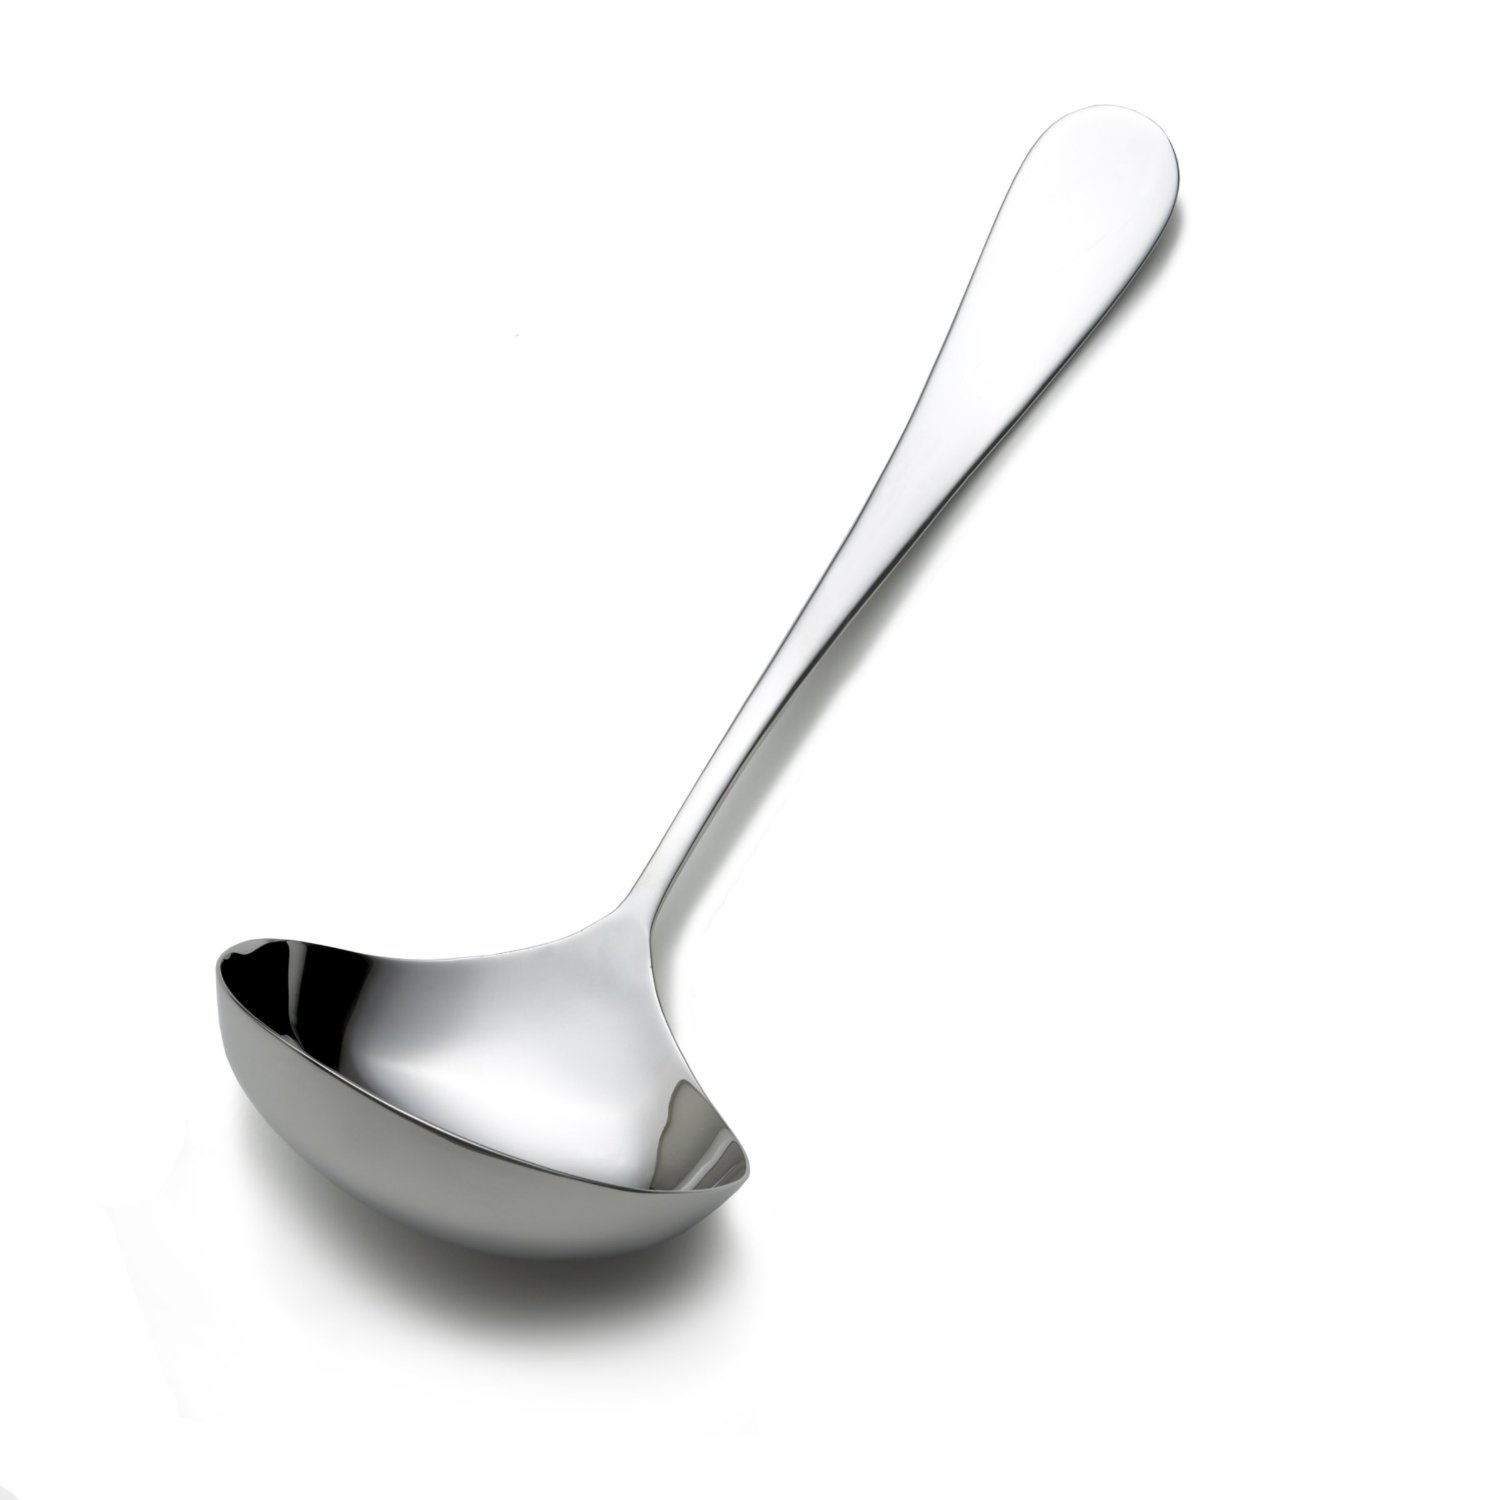 ladle uses and function